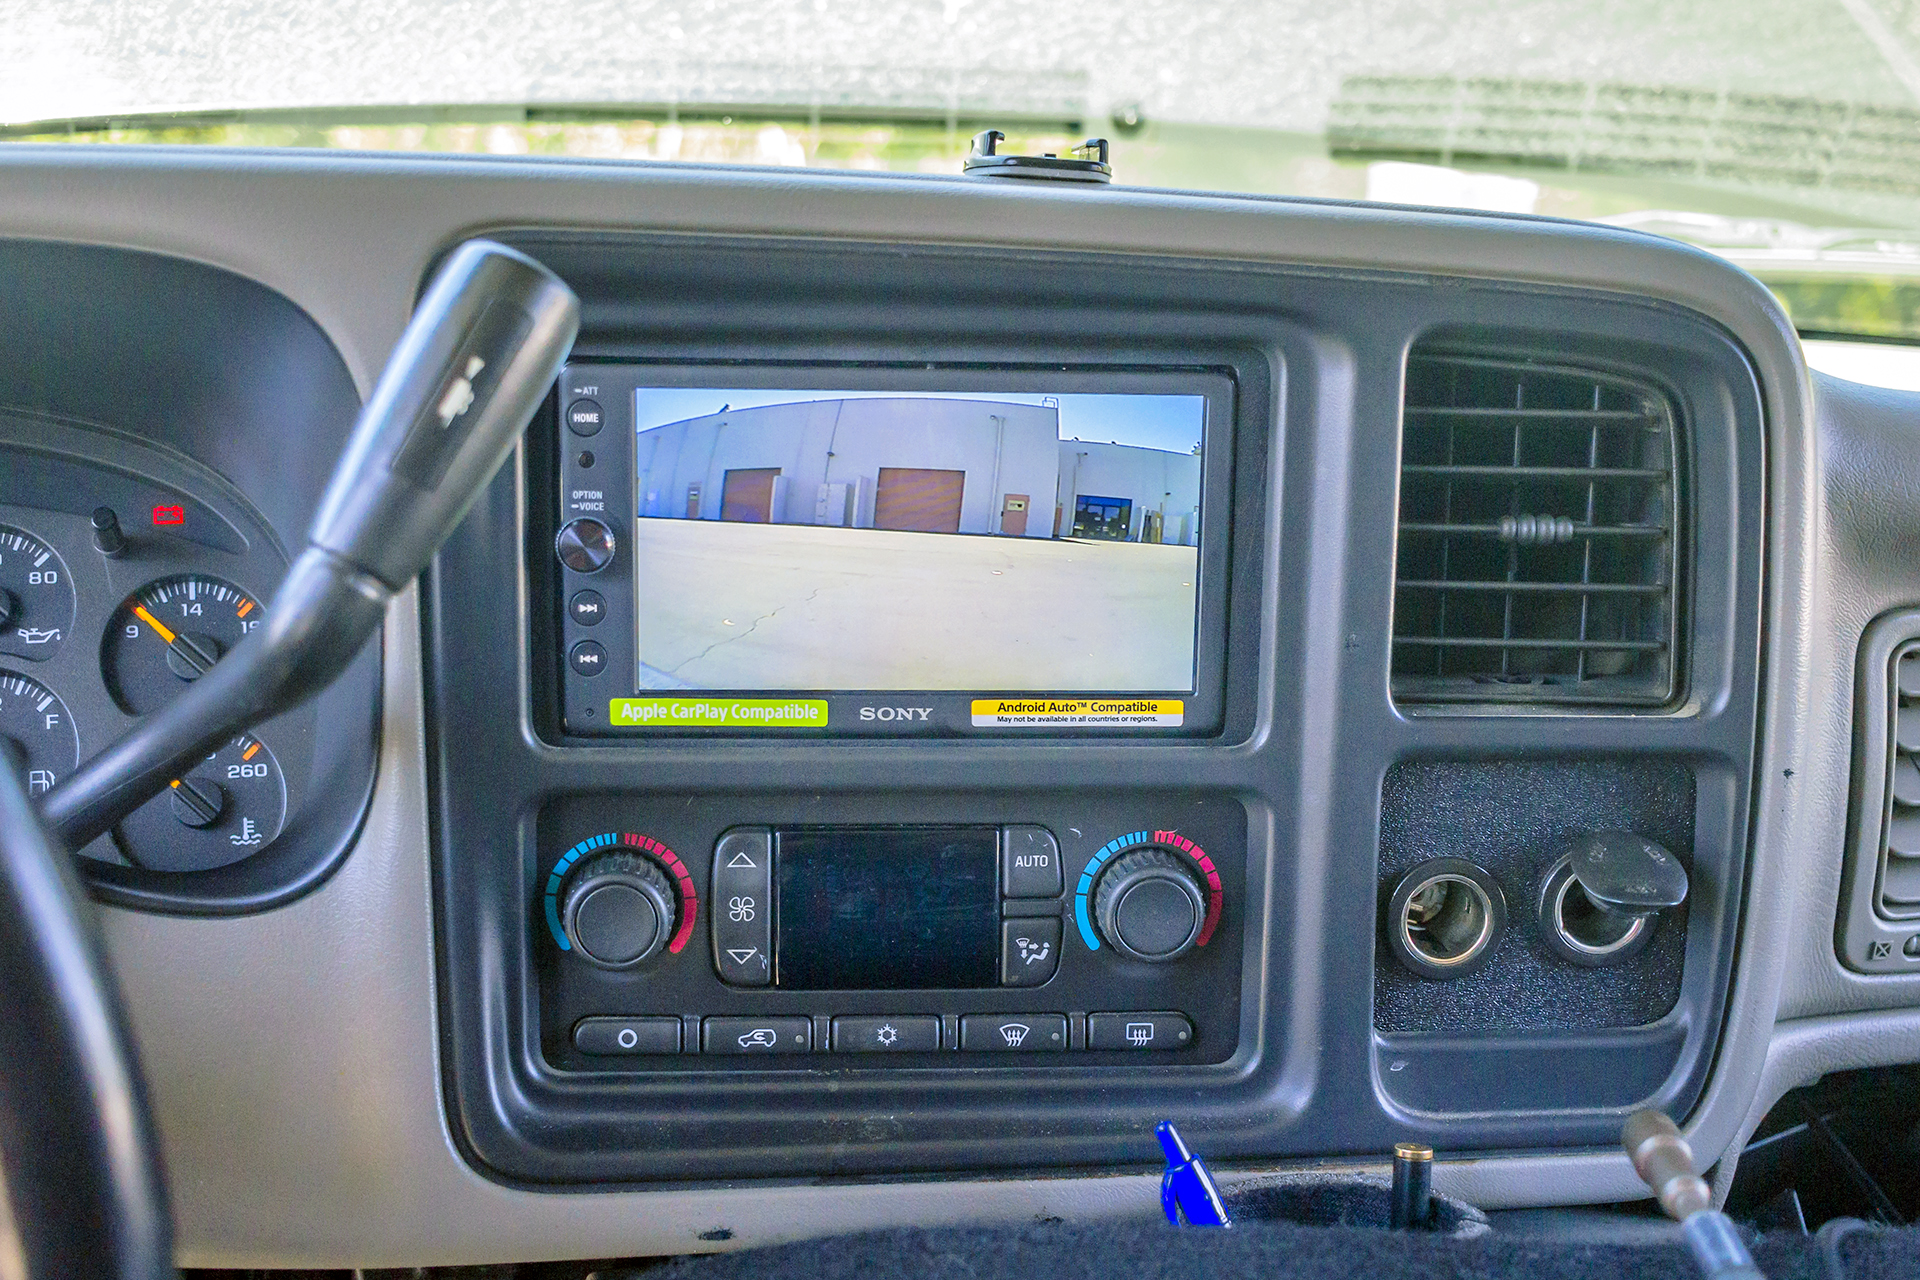 This 2004 Chevy Silverado gets an updated radio with Apple Carplay and a backup camera! — Twelve